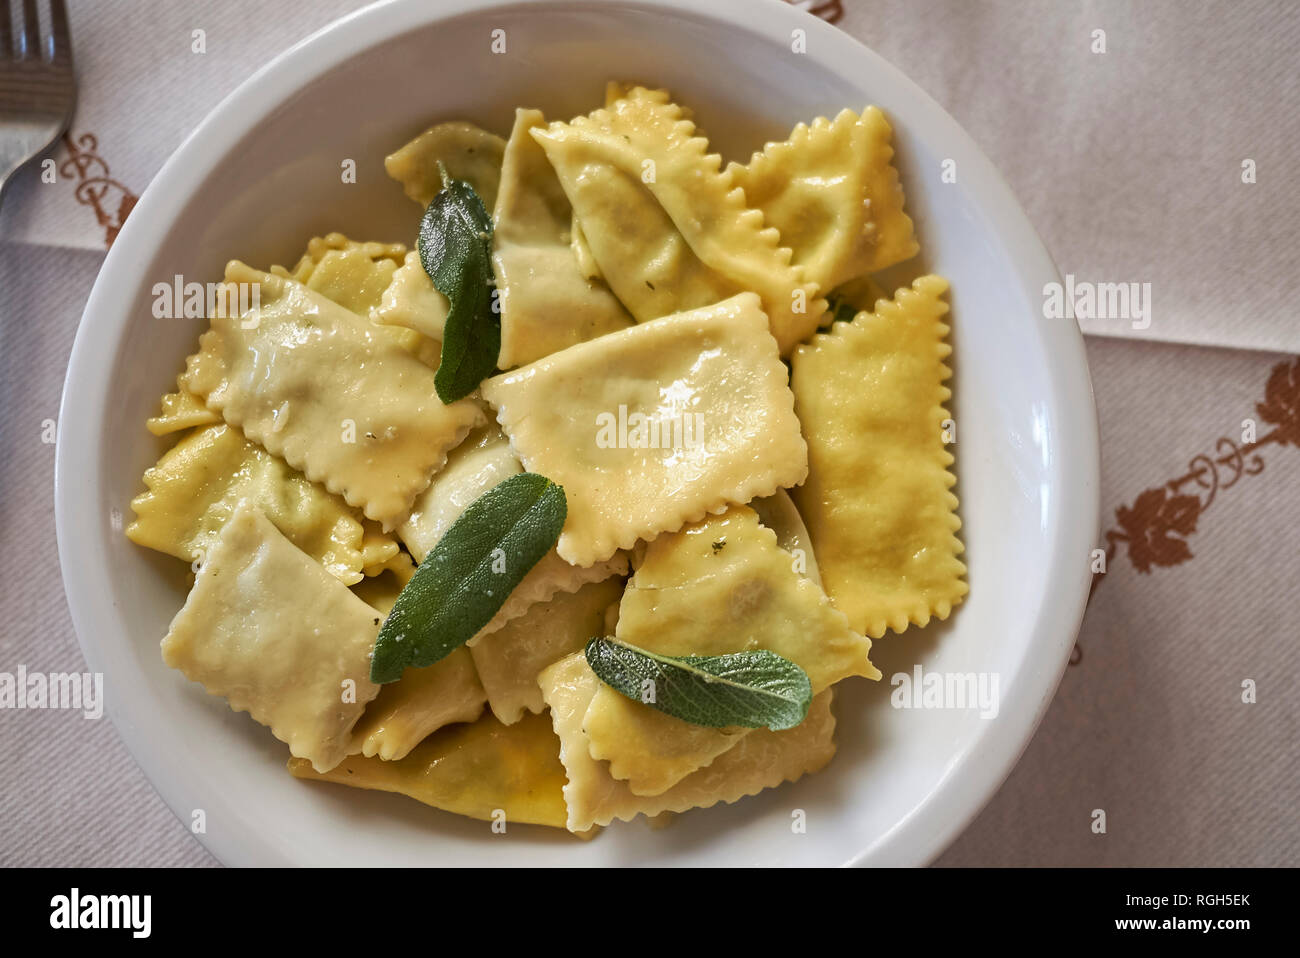 Ravioli pasta with butter and sage Stock Photo